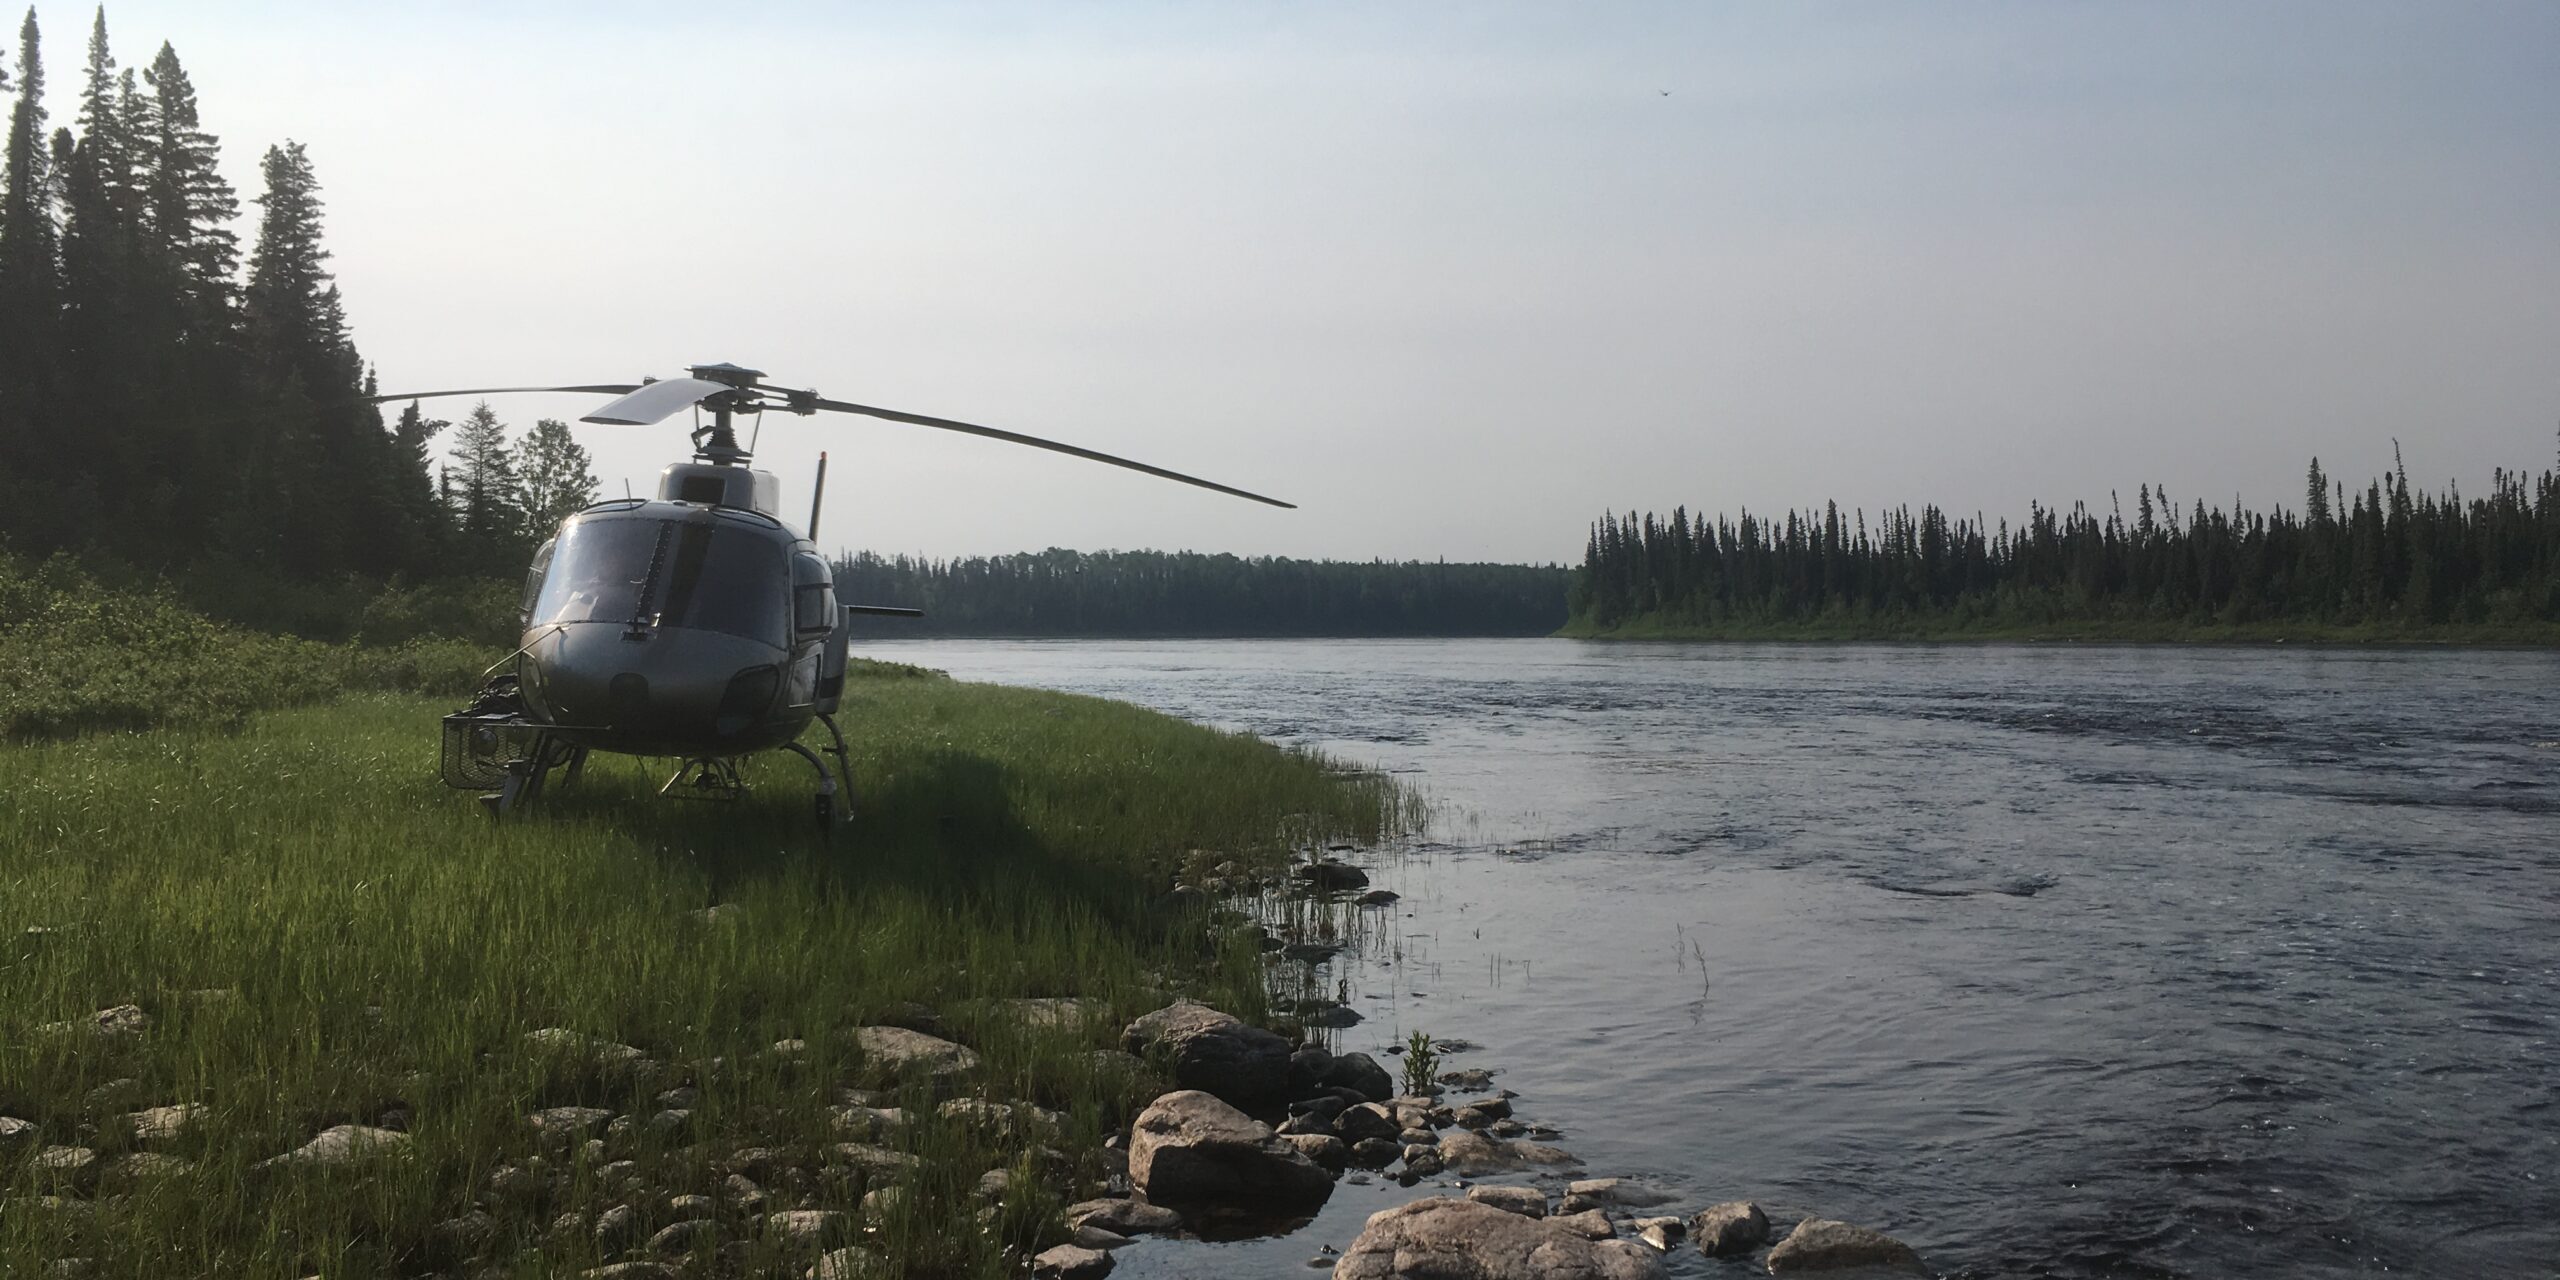 A photo of a helicopter landed on the grass beside a river.